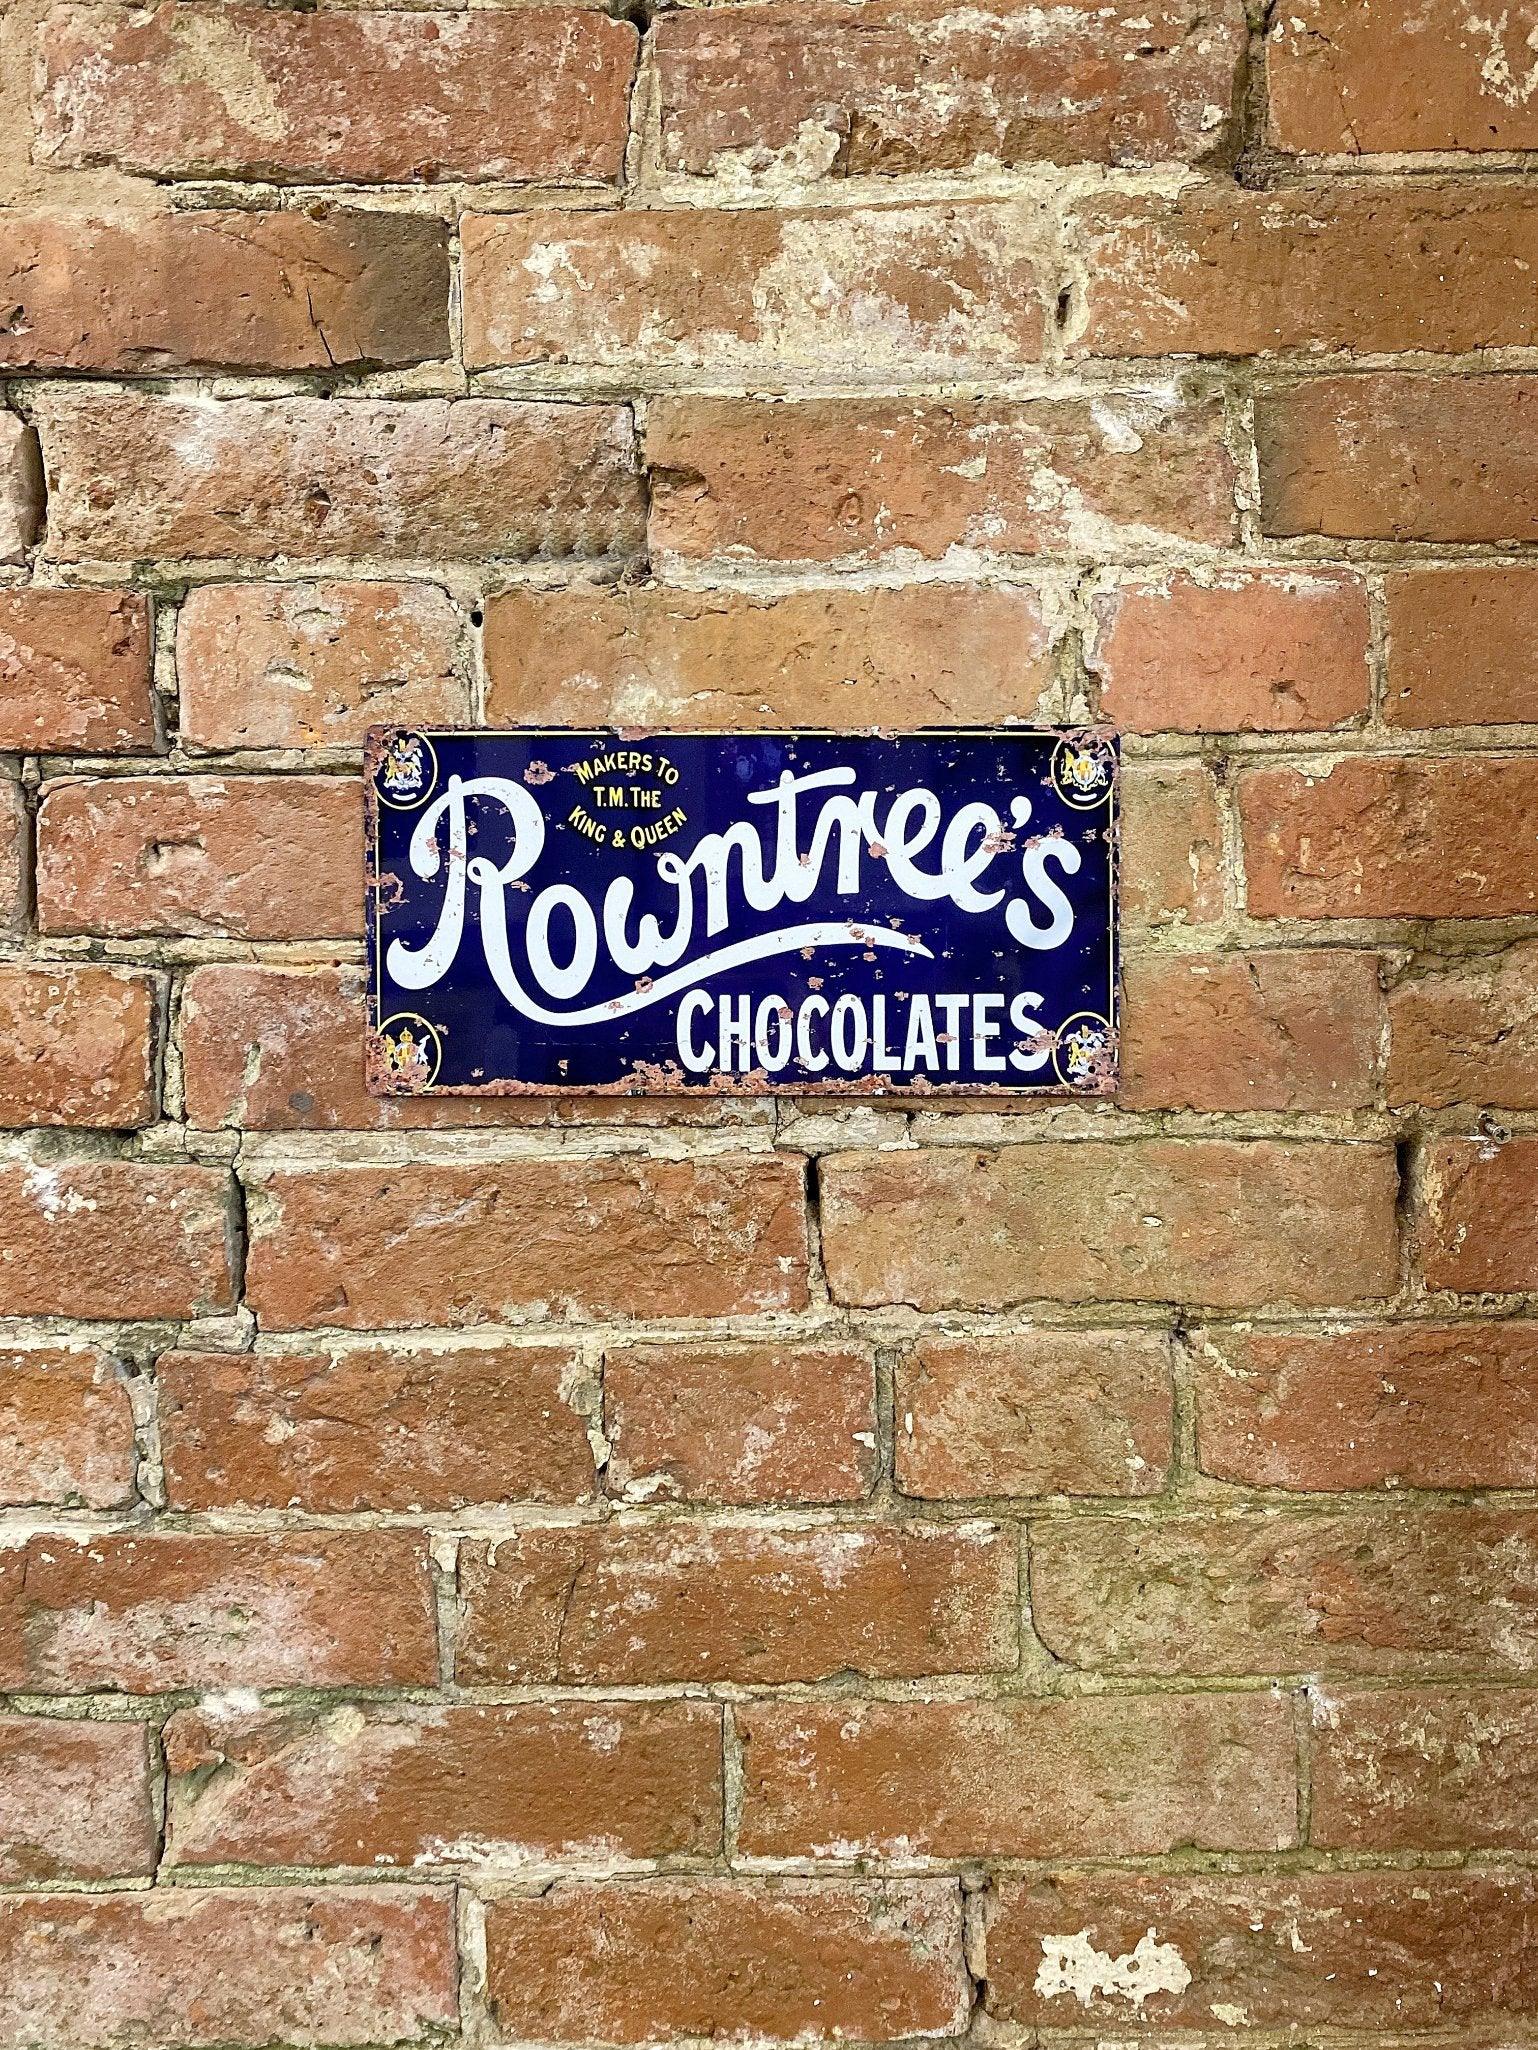 View Metal Advertising Wall Sign Rowntrees Chocolate Blue information